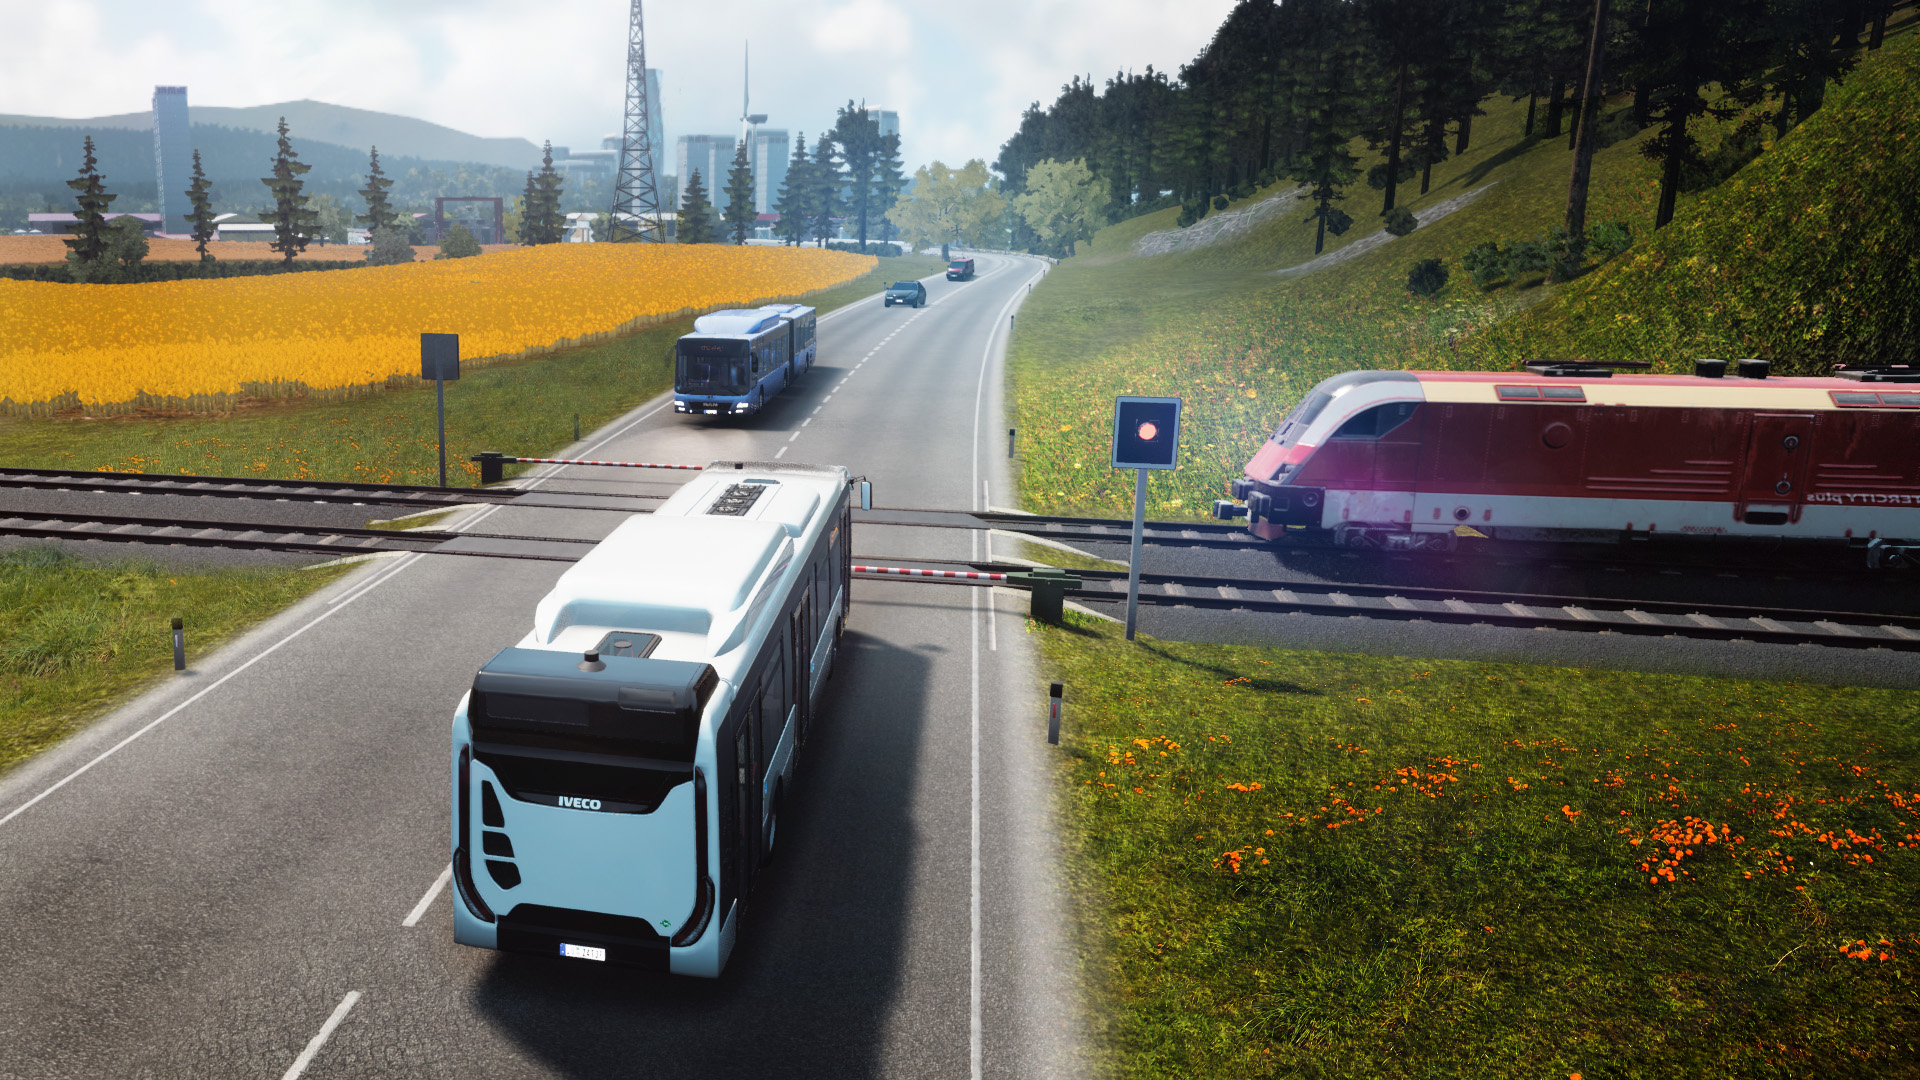 All Bus Simulator Games for PC Free Download, by Core Simator